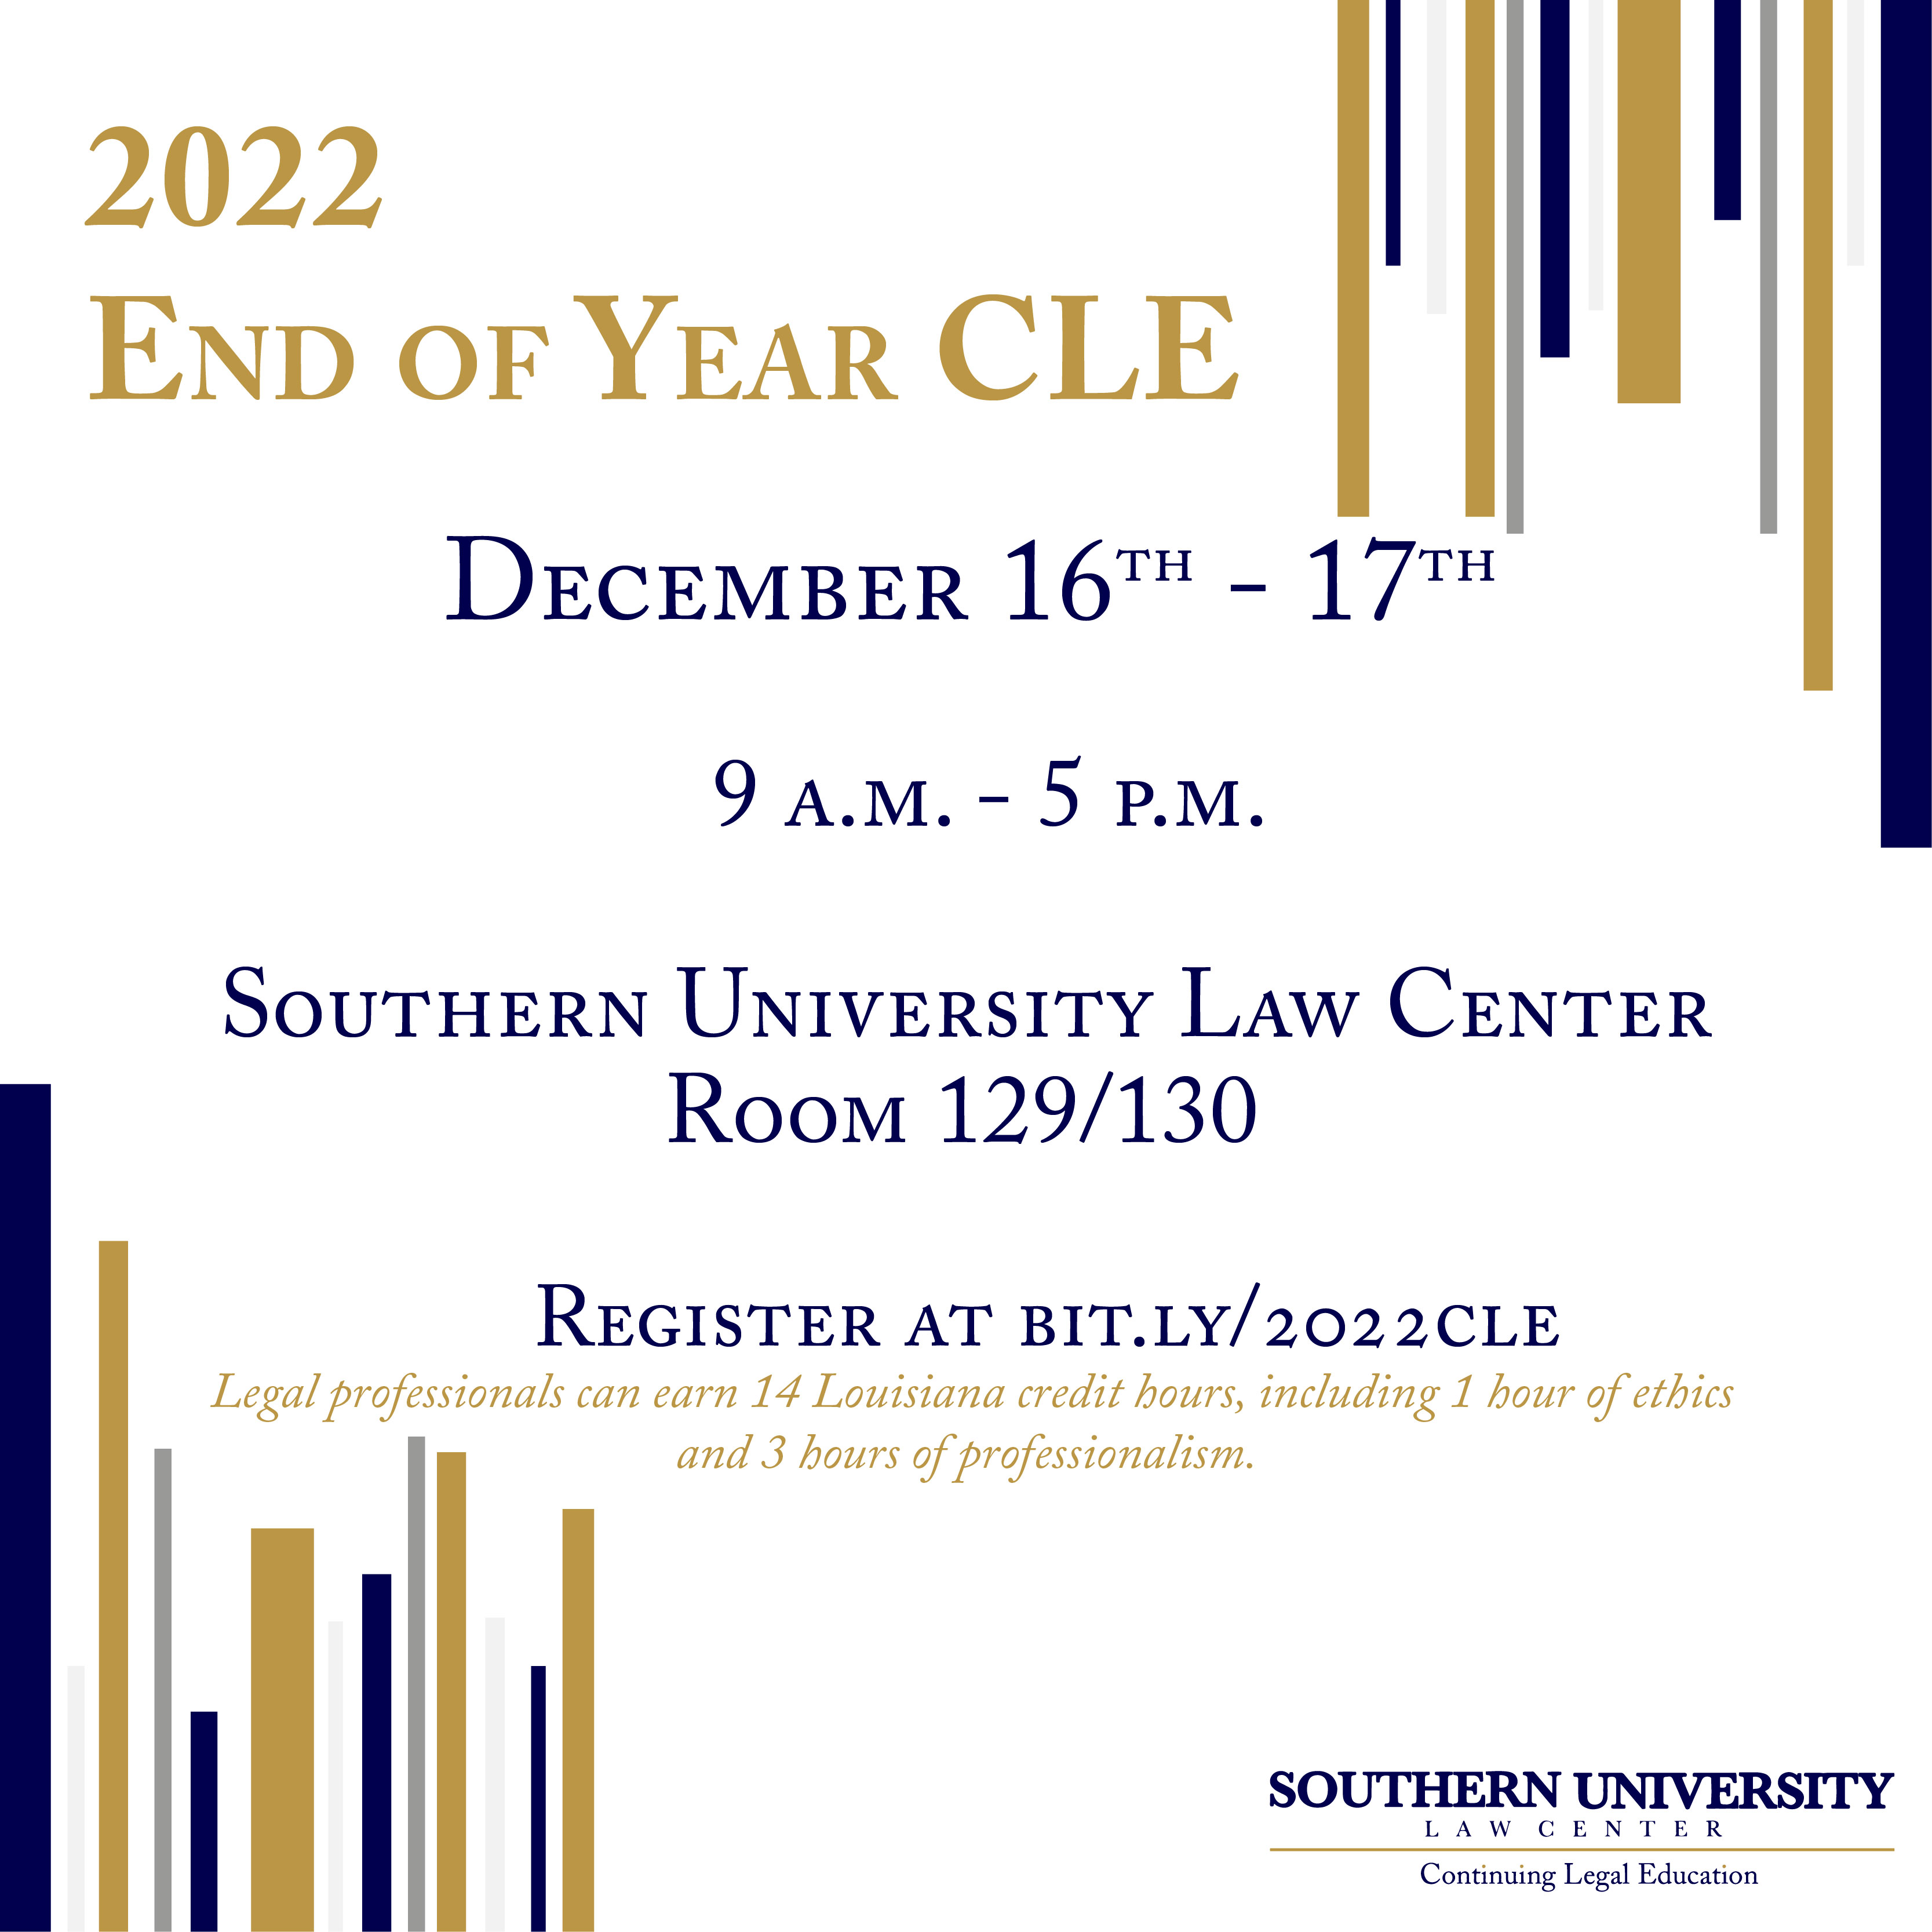 End-of-Year CLE